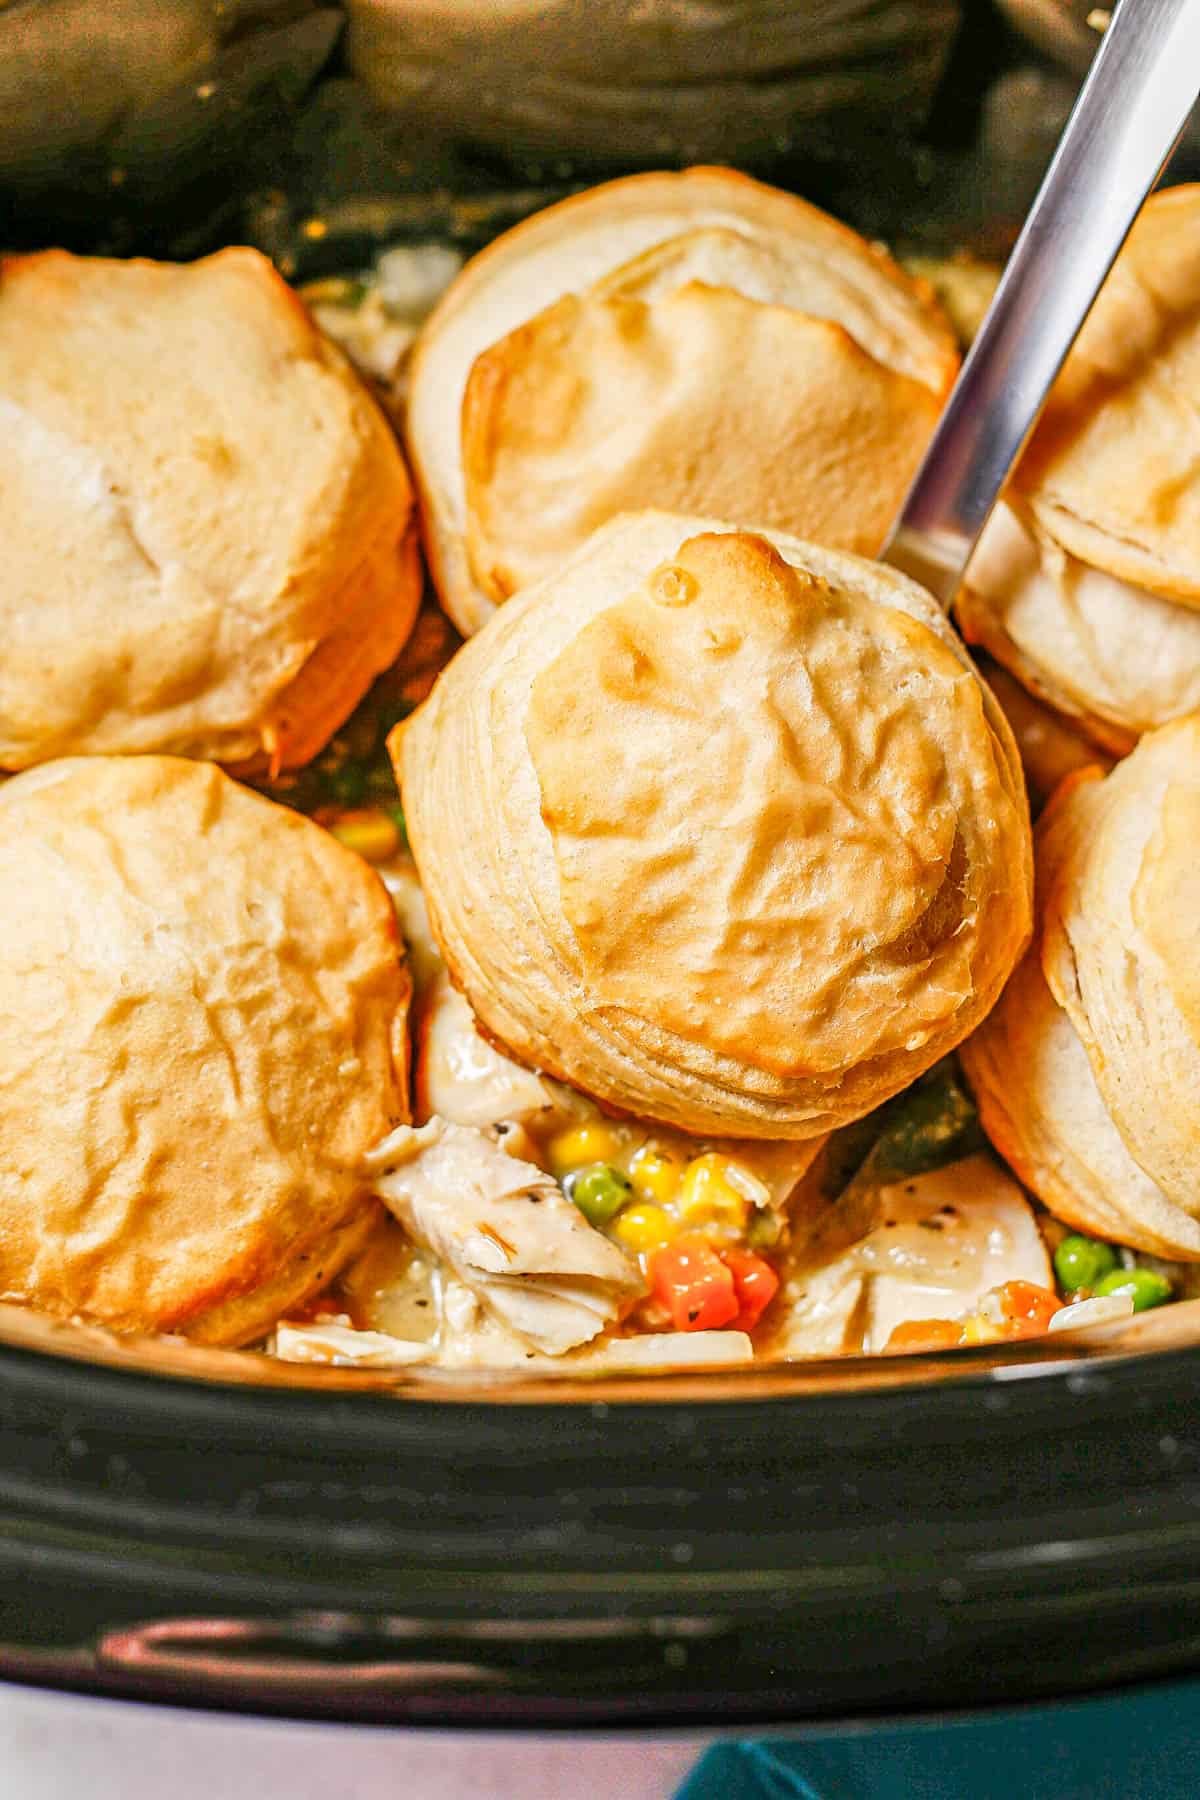 A silver ladle scooping up chicken pot pie and a biscuit from a slow cooker.